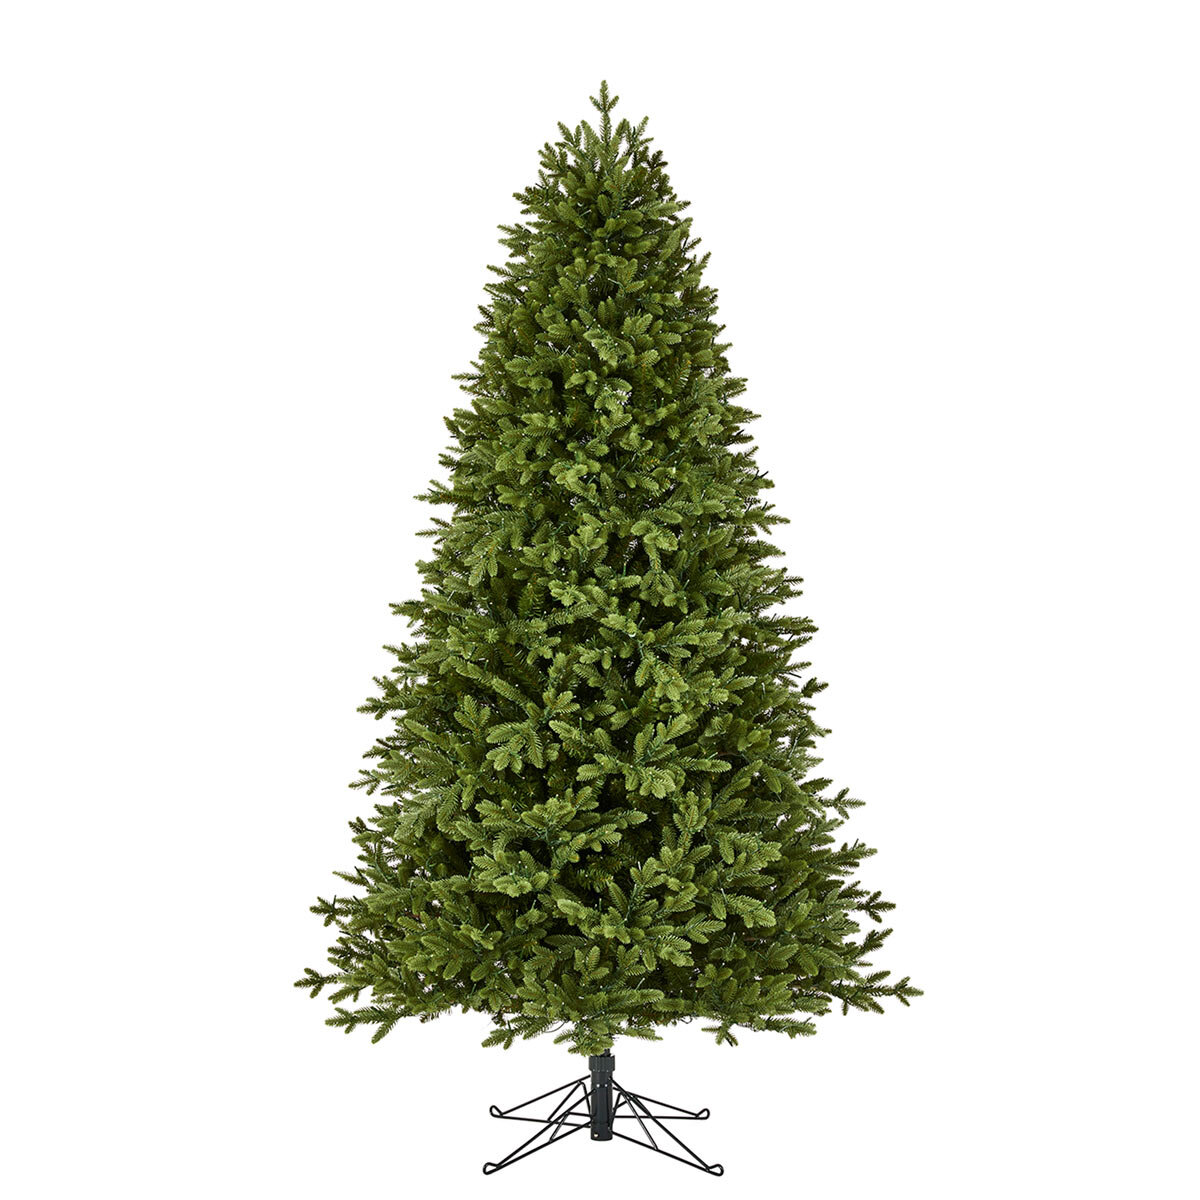 Buy 6.5' Pre-Lit Micro Dot LED Tree Overview Image at Costco.co.uk